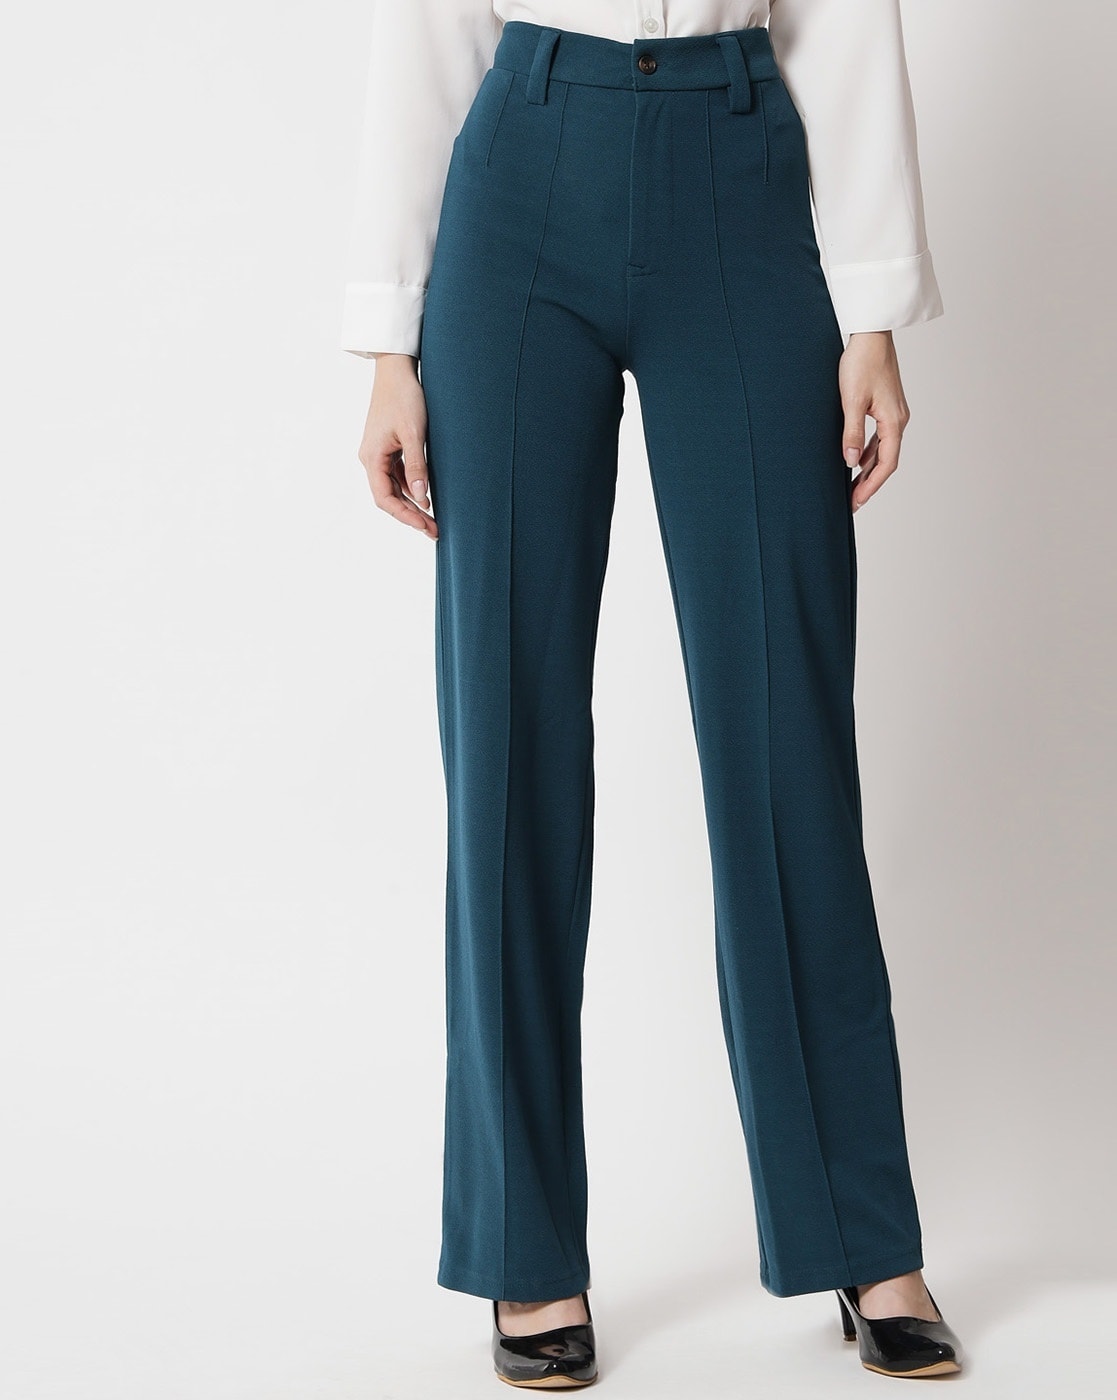 Buy Green Straight Pants With Lace Details Online - W for Woman